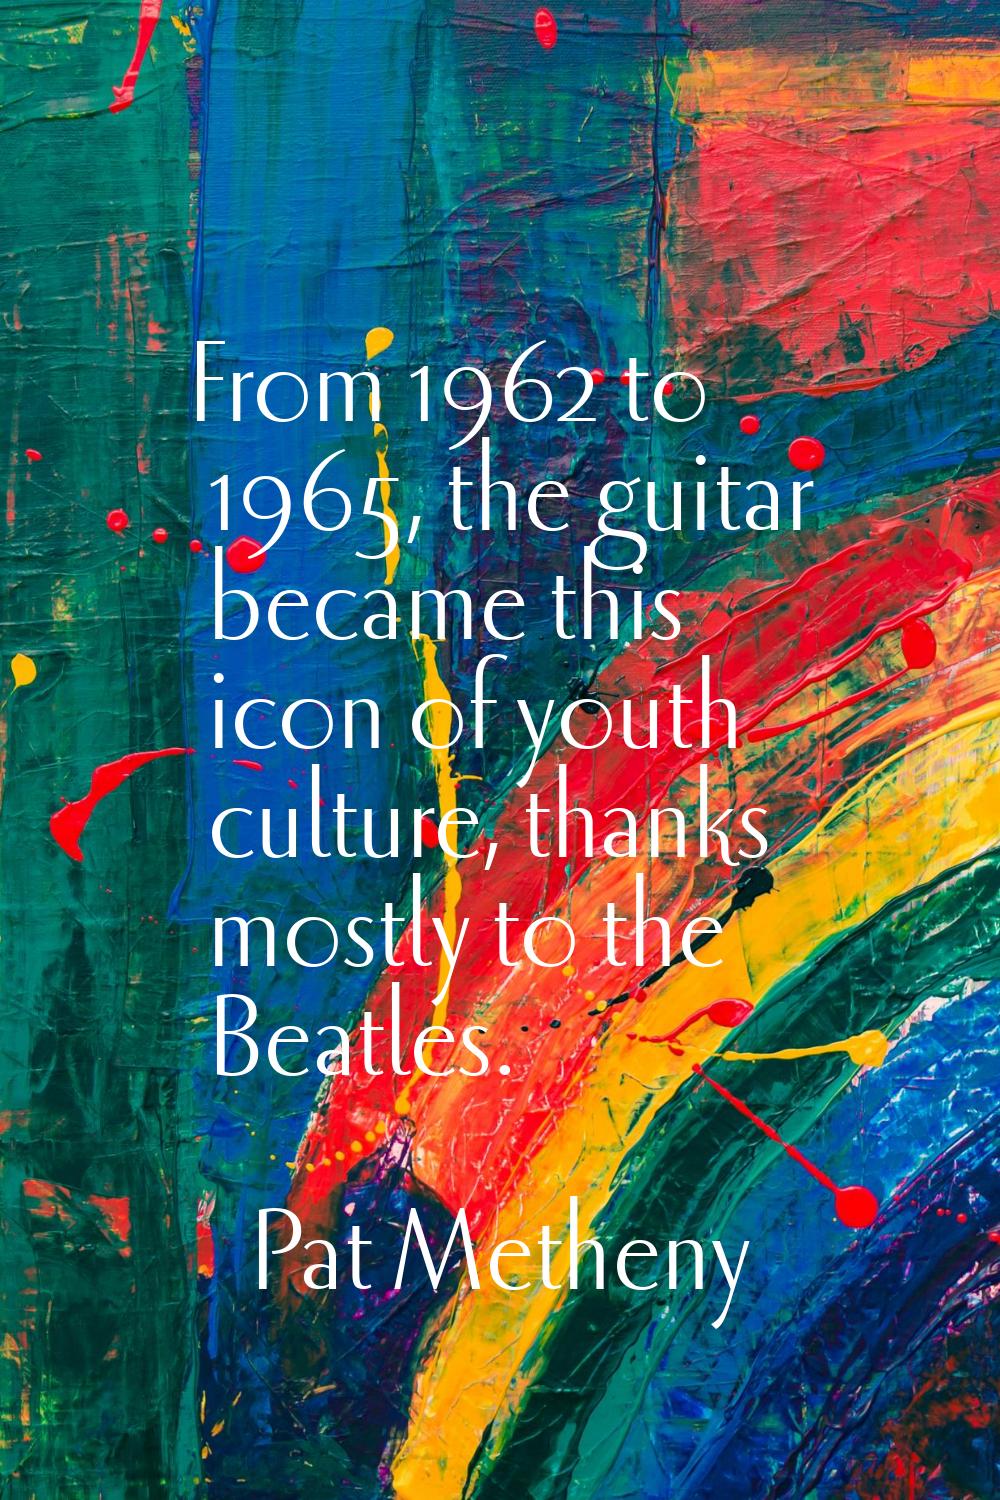 From 1962 to 1965, the guitar became this icon of youth culture, thanks mostly to the Beatles.